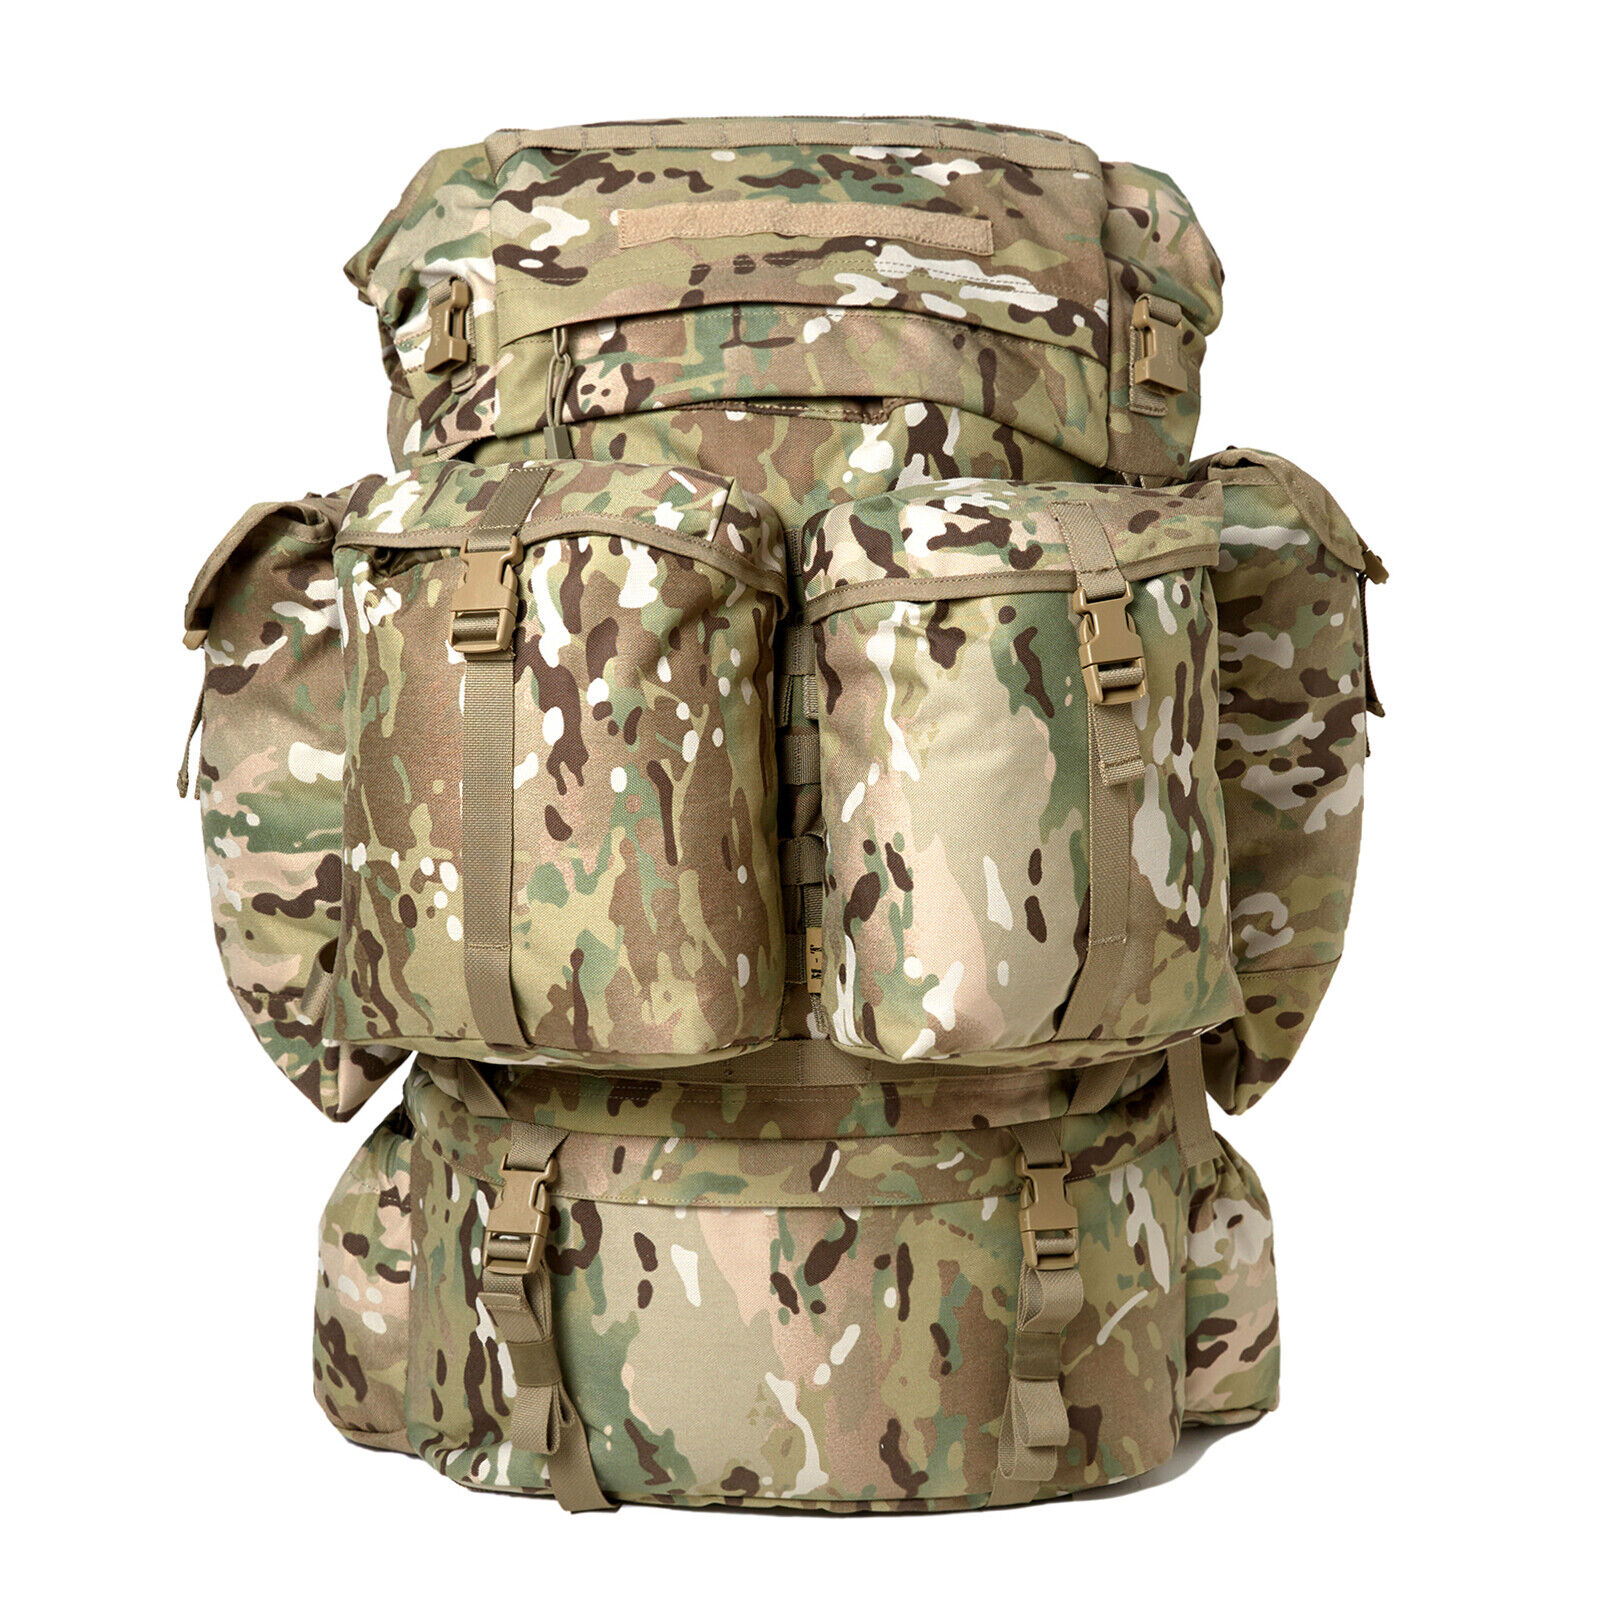 AKMAX Military FILBE Rucksack Main Pack with External Frame and Hydration Pouch